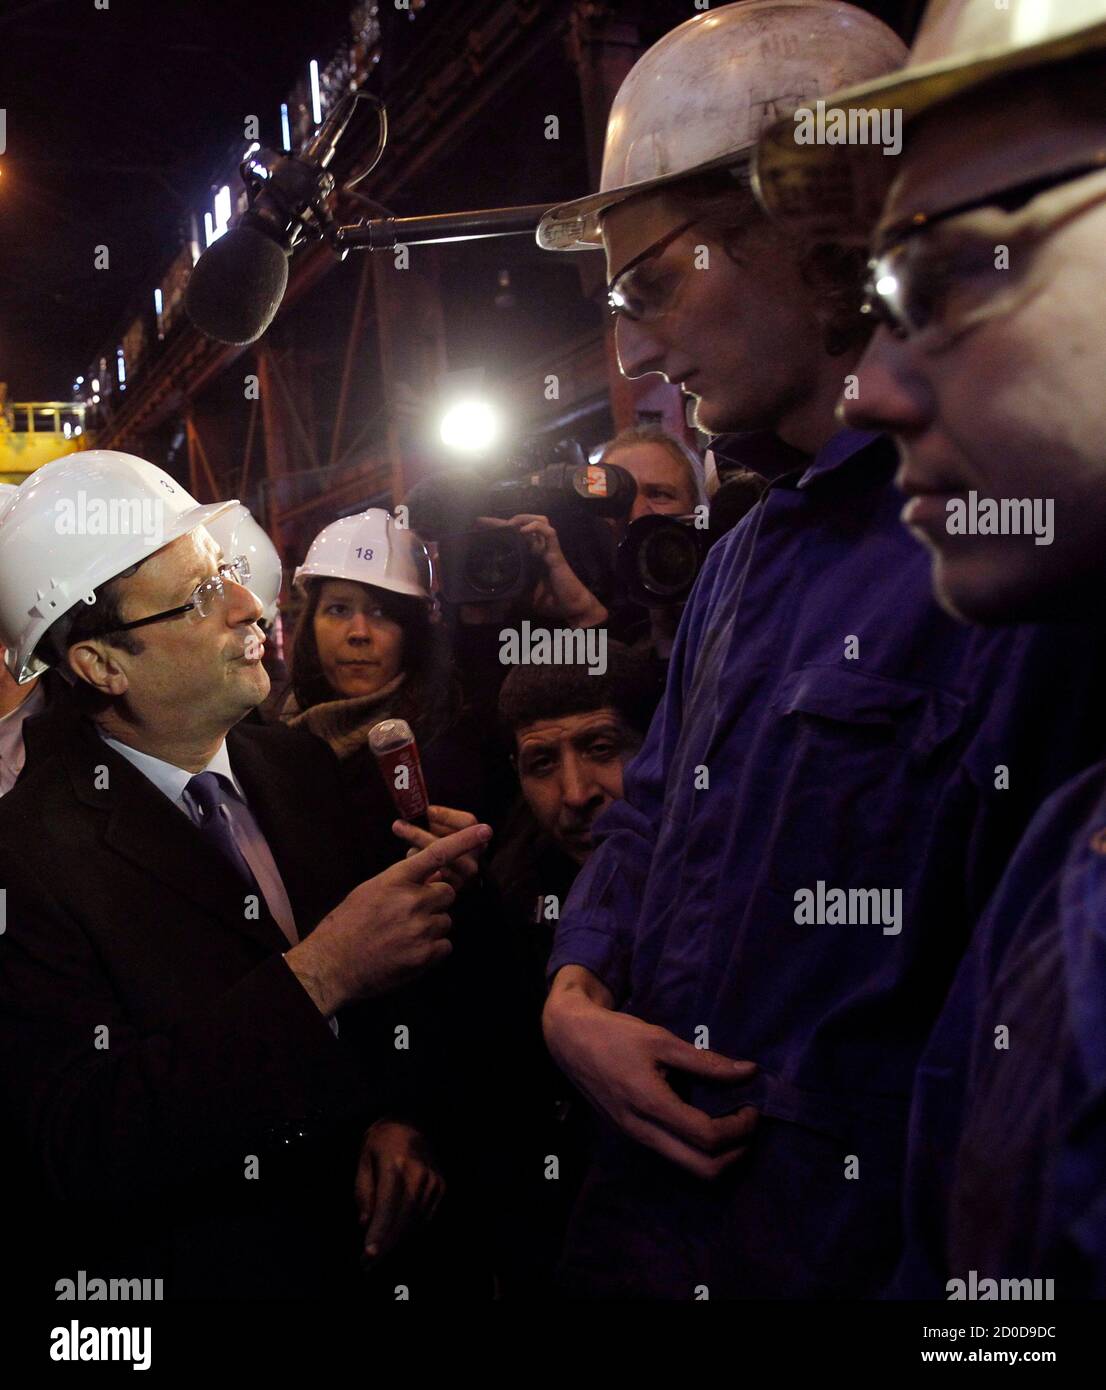 Francois Hollande (L), Socialist Party candidate for the 2012 French presidential election, speaks with steel workers as he visits Akers, a steel factory, in Thionville, eastern France, January 17, 2012.    REUTERS/Christophe Ena/Pool   (FRANCE - Tags: POLITICS BUSINESS EMPLOYMENT) Stock Photo